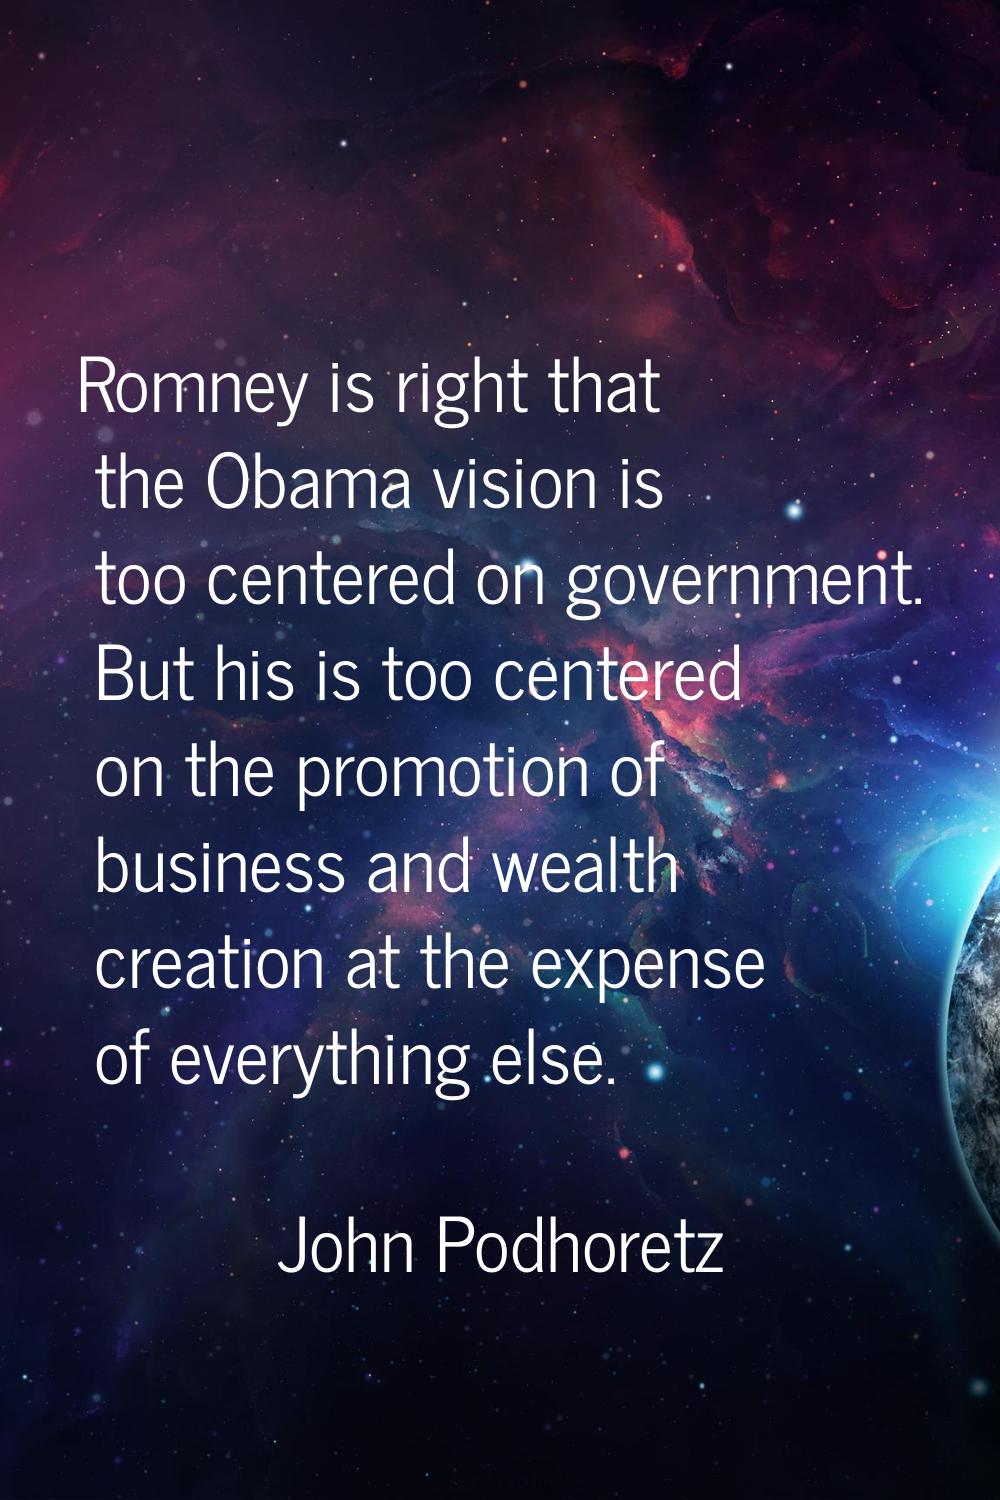 Romney is right that the Obama vision is too centered on government. But his is too centered on the